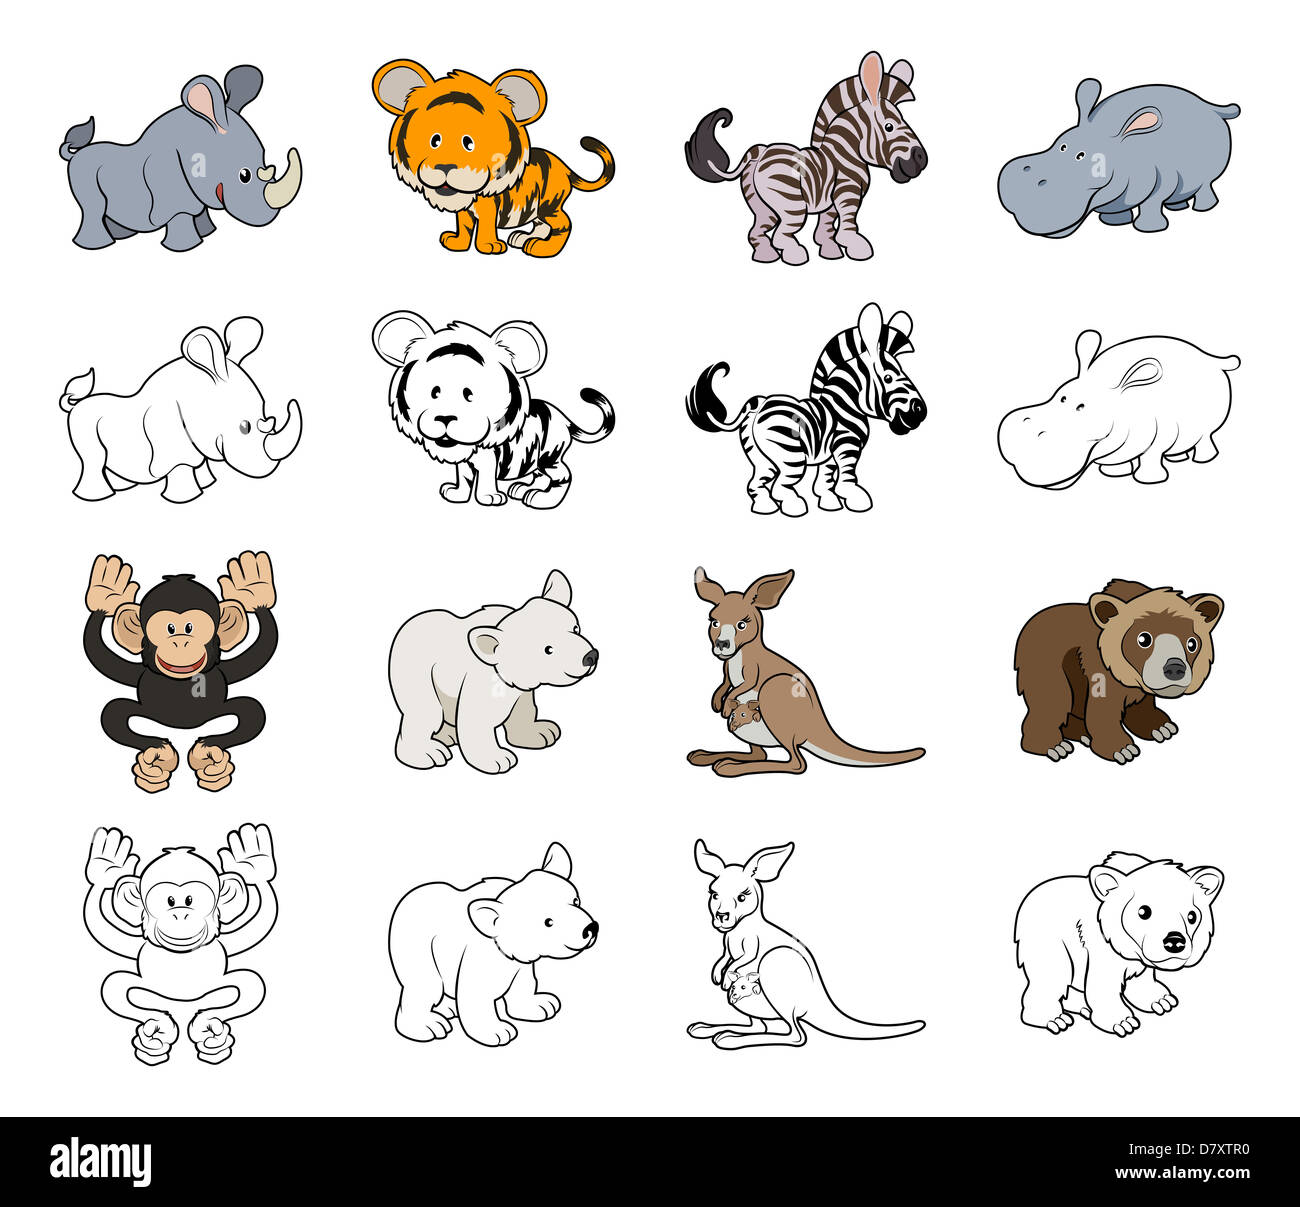 A set of cartoon wild animal illustrations. Color and black an white outline versions. Stock Photo